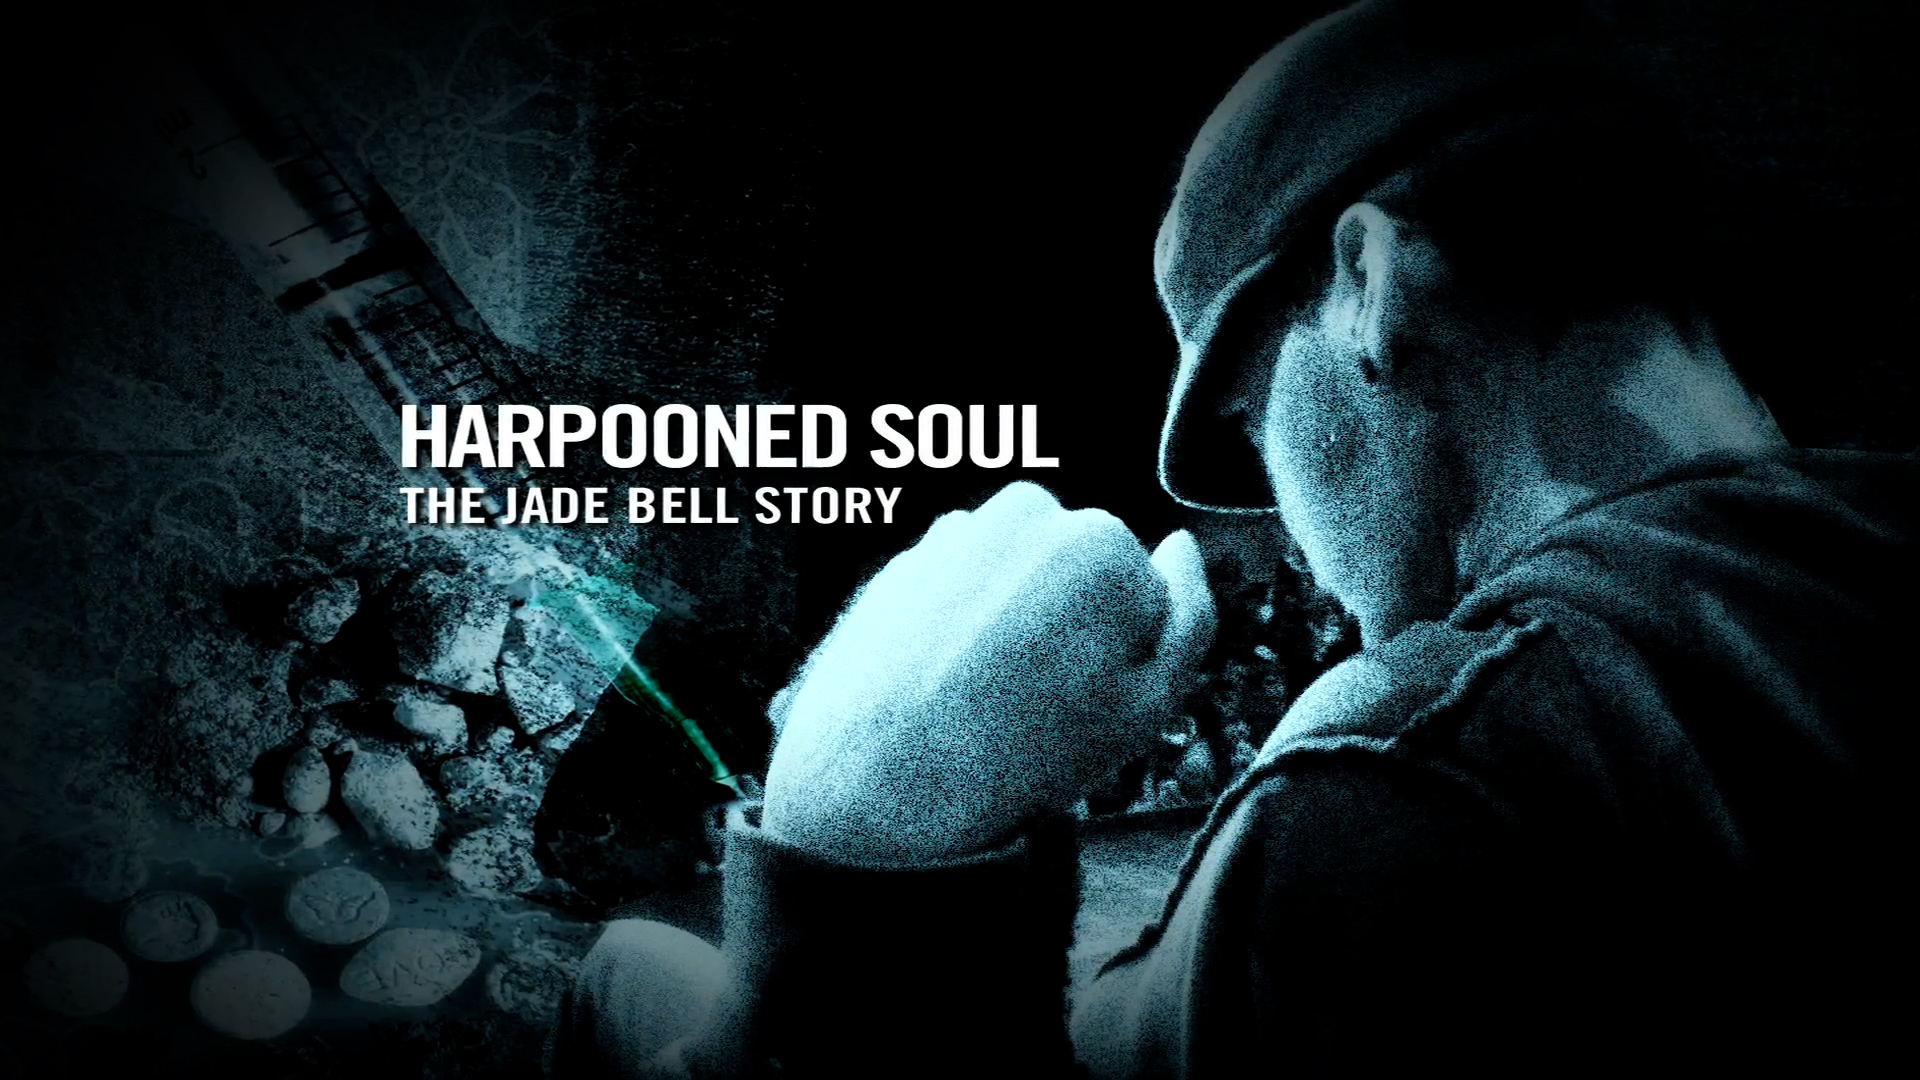 Image of Jade Bell with the words Harpooned Soul